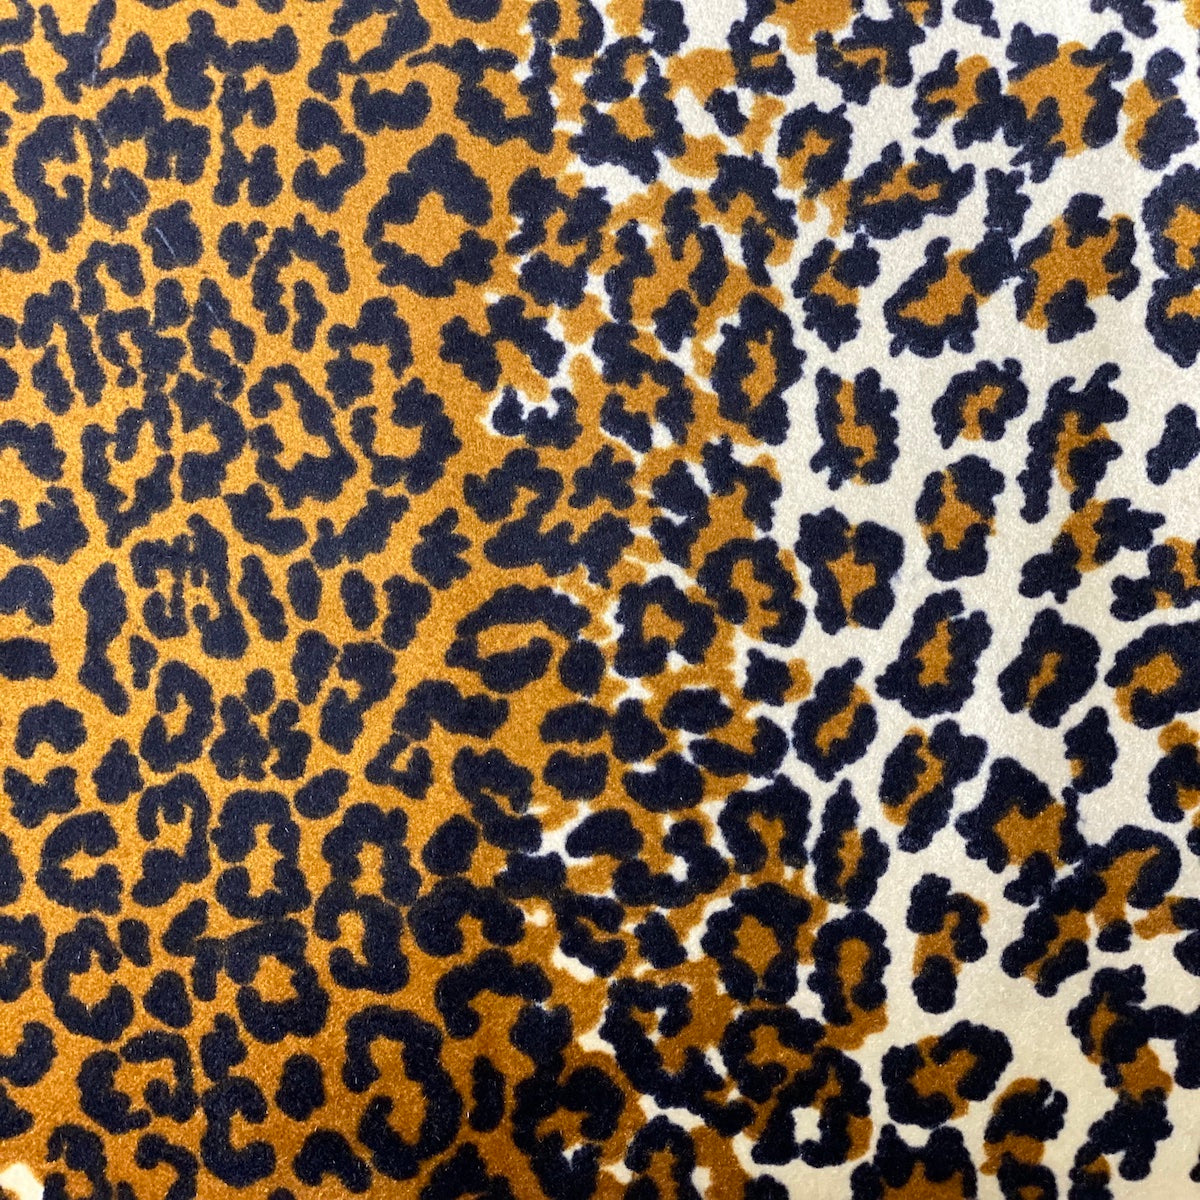 Top Fabric Swagger-Hendrix Leopard Cut Velvet Upholstery Fabric